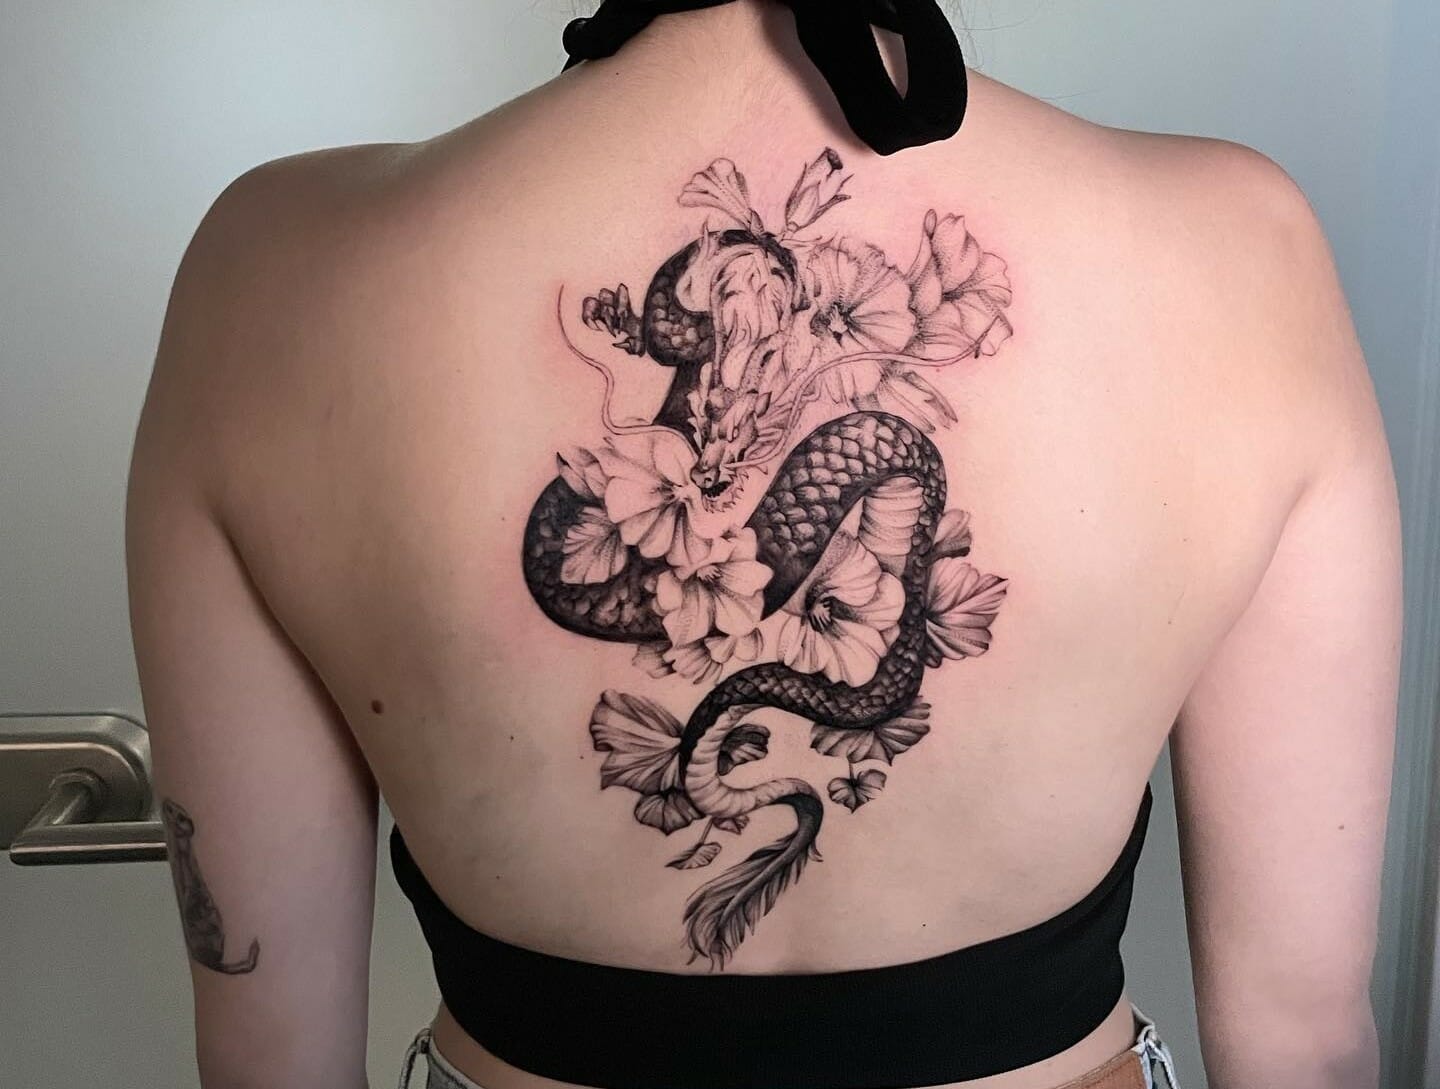 Tattoo uploaded by ashfair69  Dragon and cherry blossoms  Tattoodo